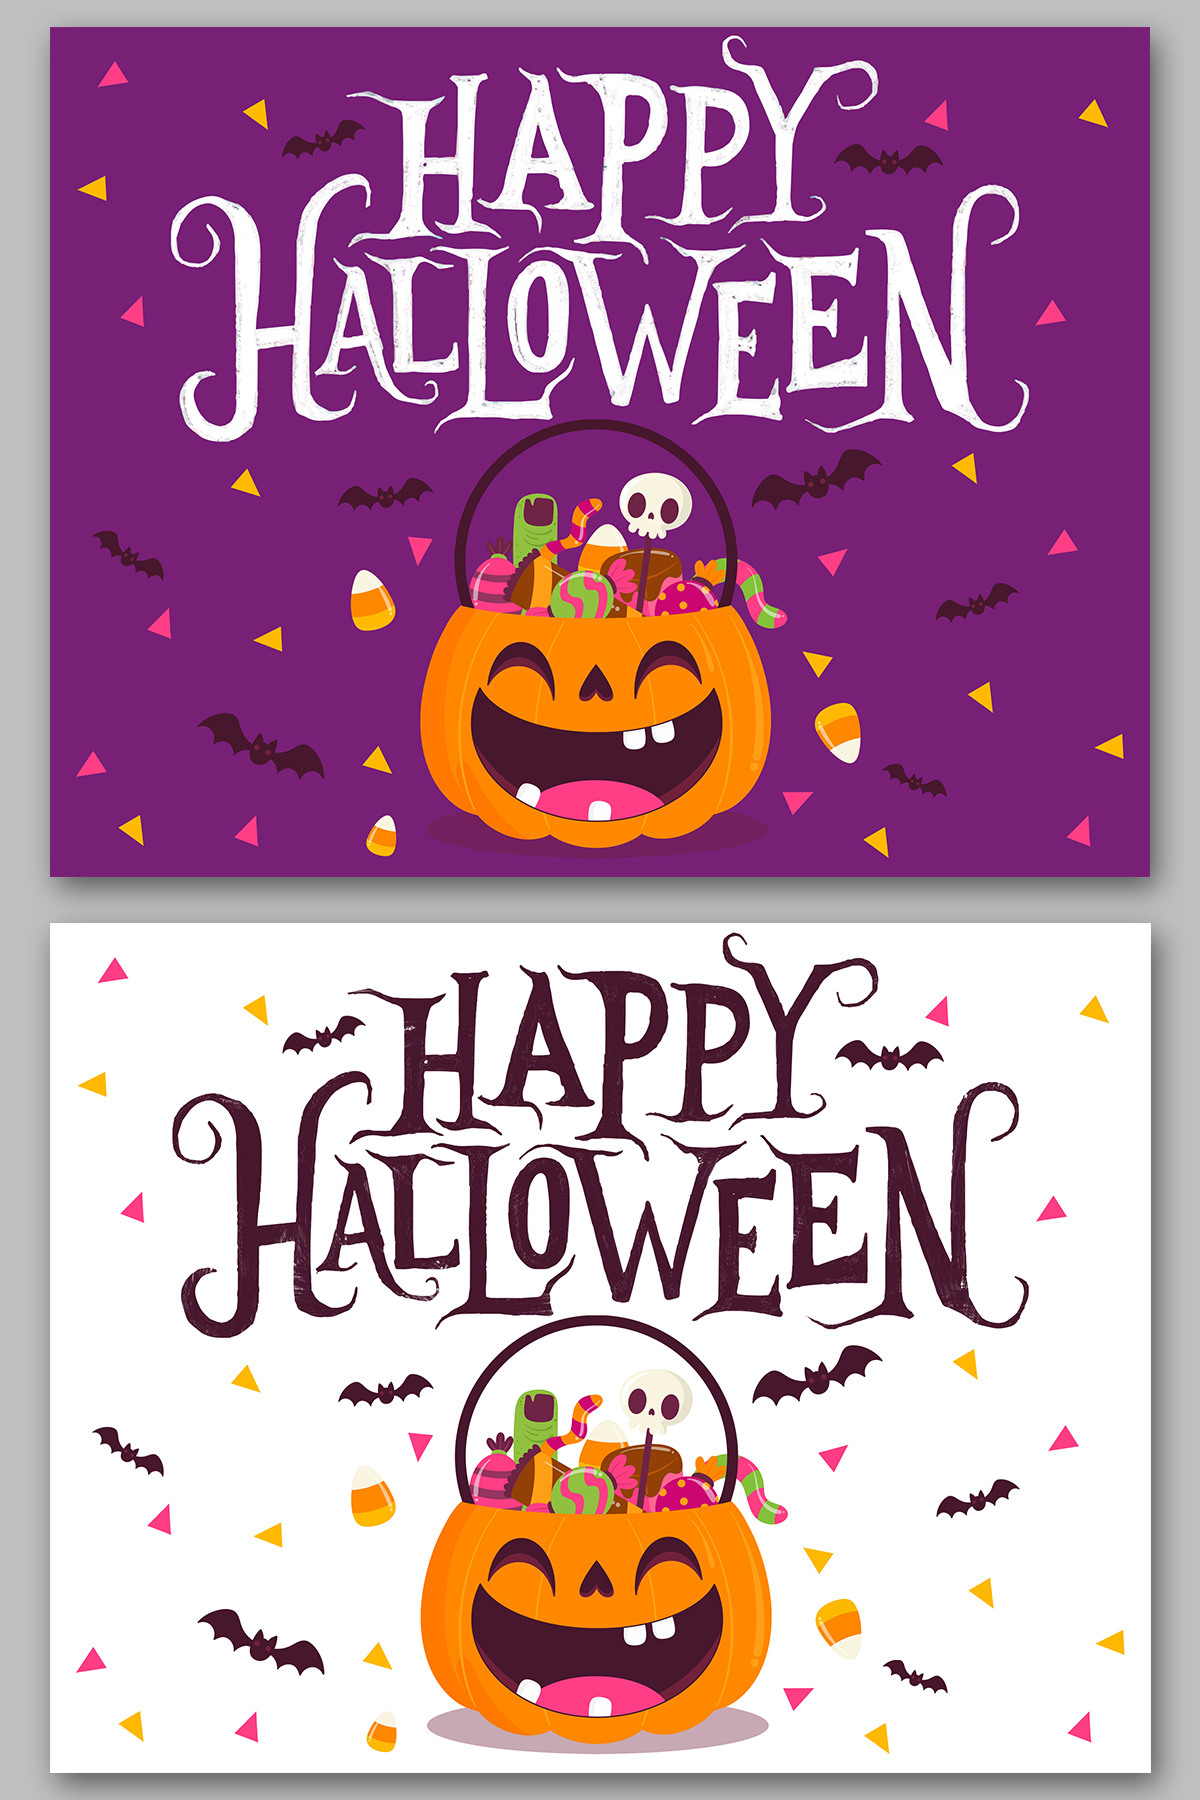 This image shows one of the free printable Halloween candy signs you can get in this free set. This sign is hanging on a door and says Happy Halloween!